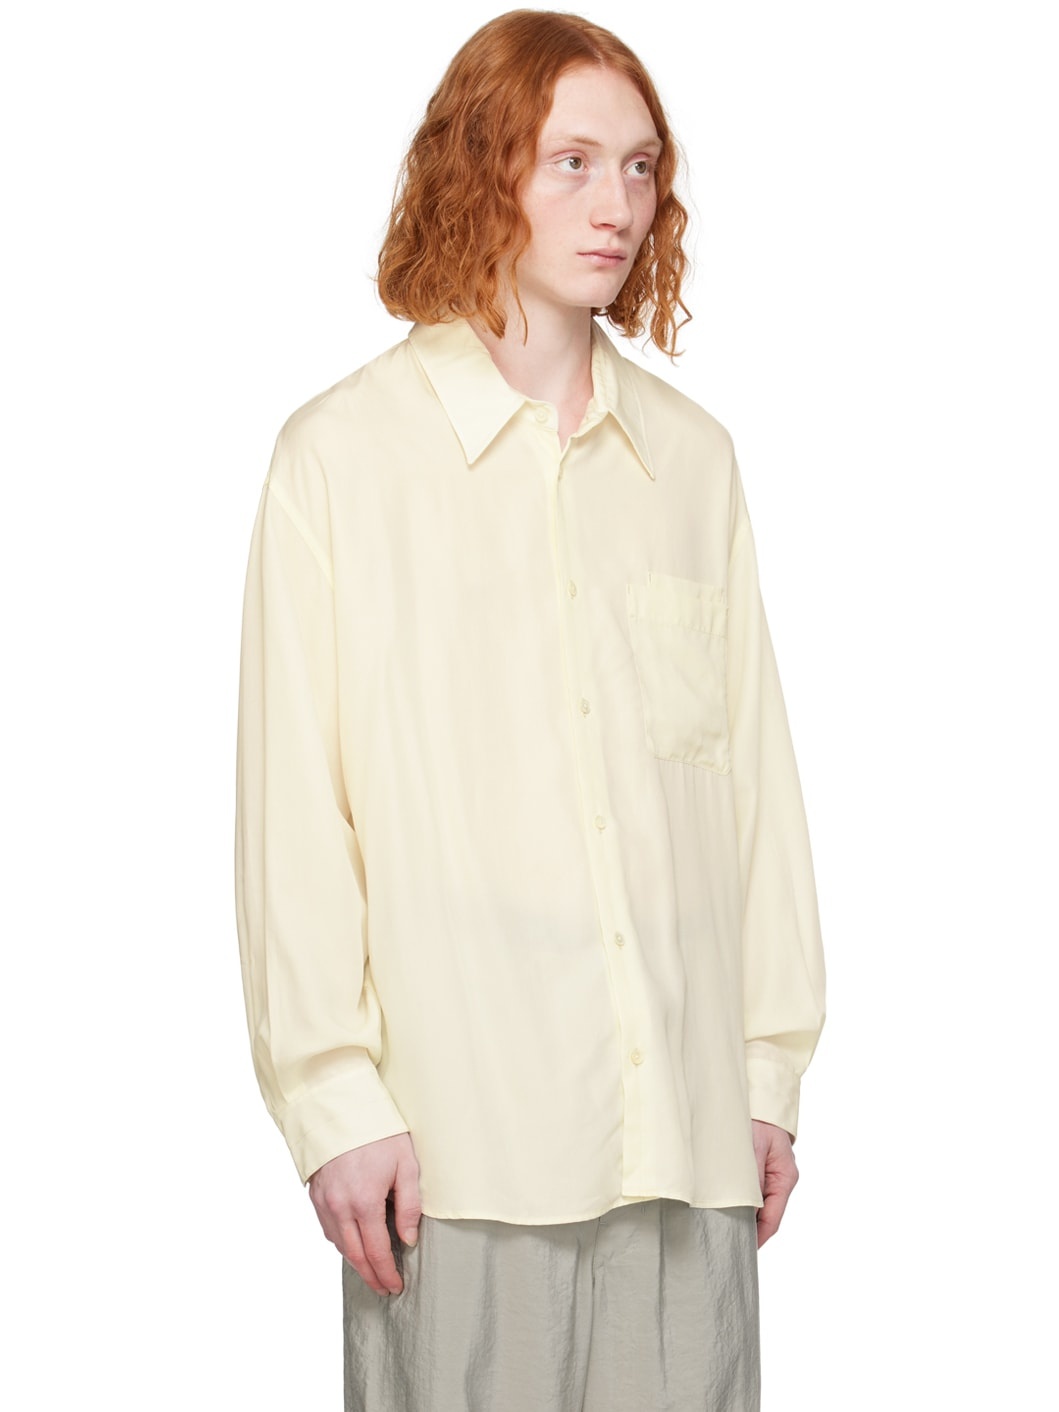 Off-White Patch Pocket Shirt - 2